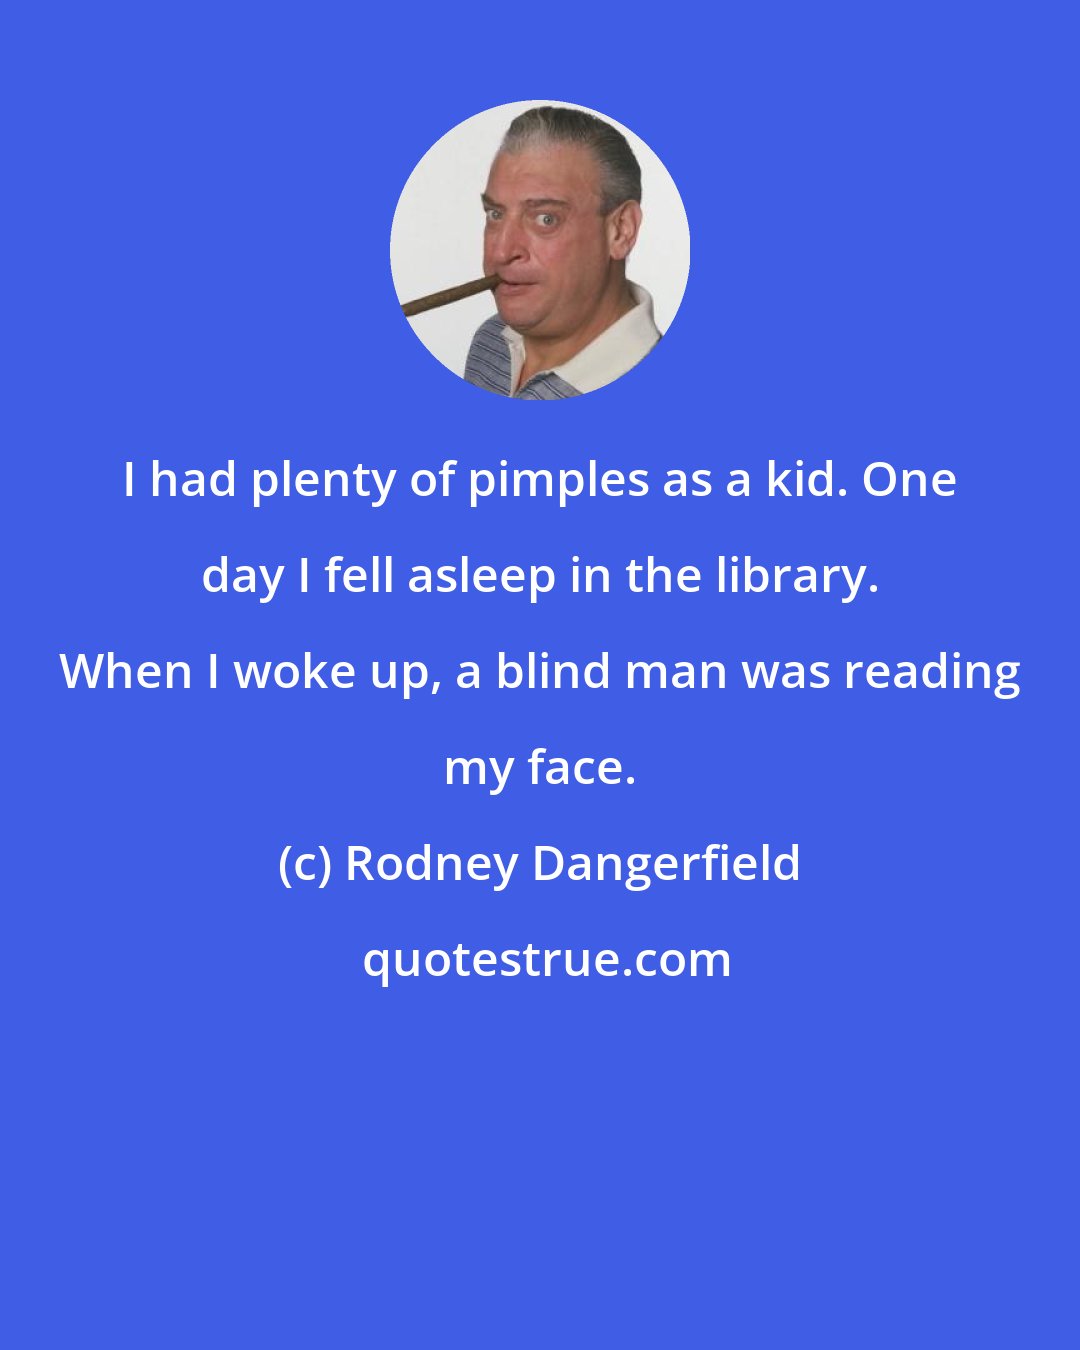 Rodney Dangerfield: I had plenty of pimples as a kid. One day I fell asleep in the library. When I woke up, a blind man was reading my face.